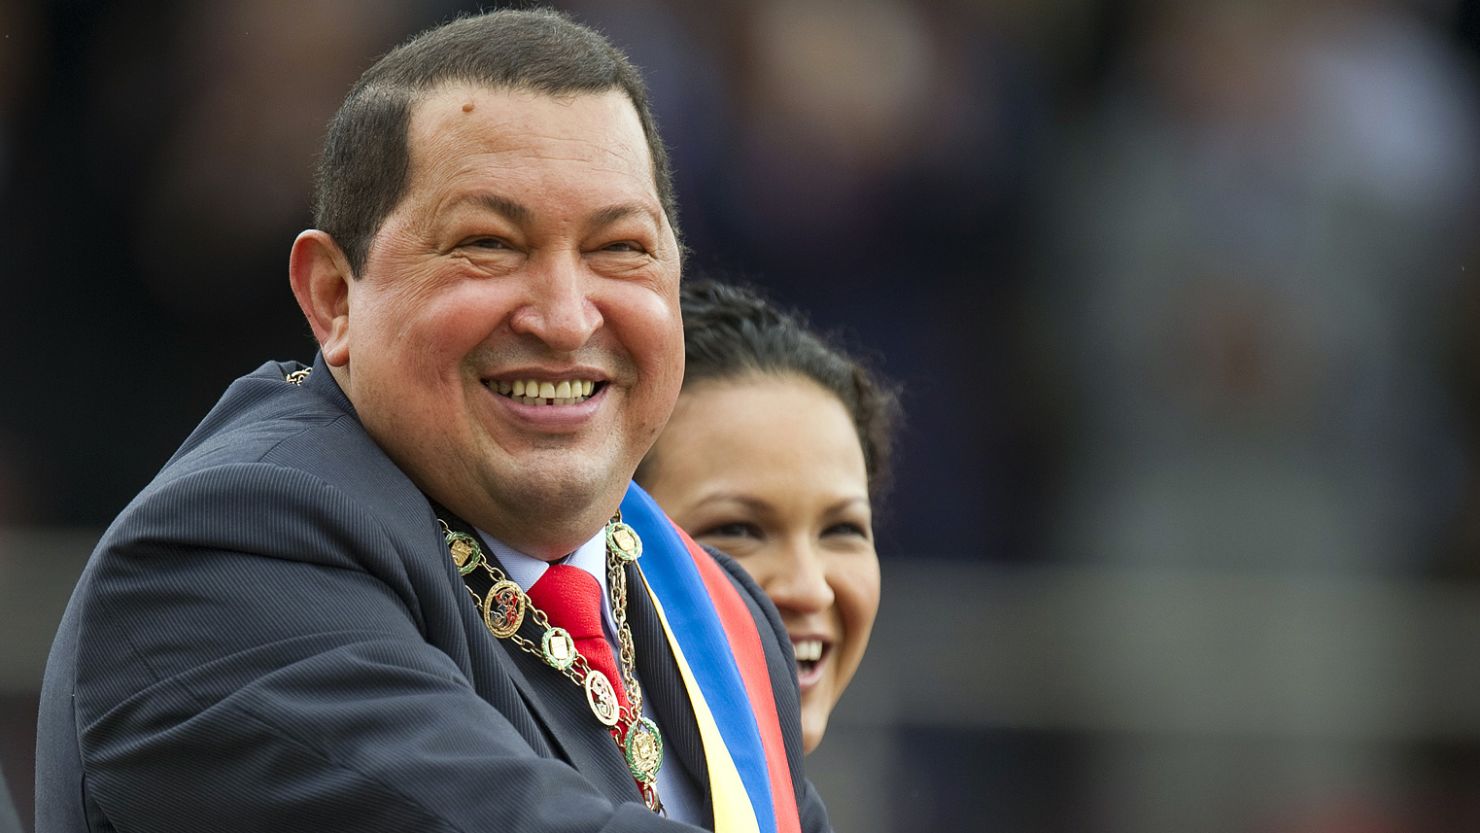 Venezulan President Hugo Chavez said he was speaking out earlier than he'd planned because of the increasing speculation.